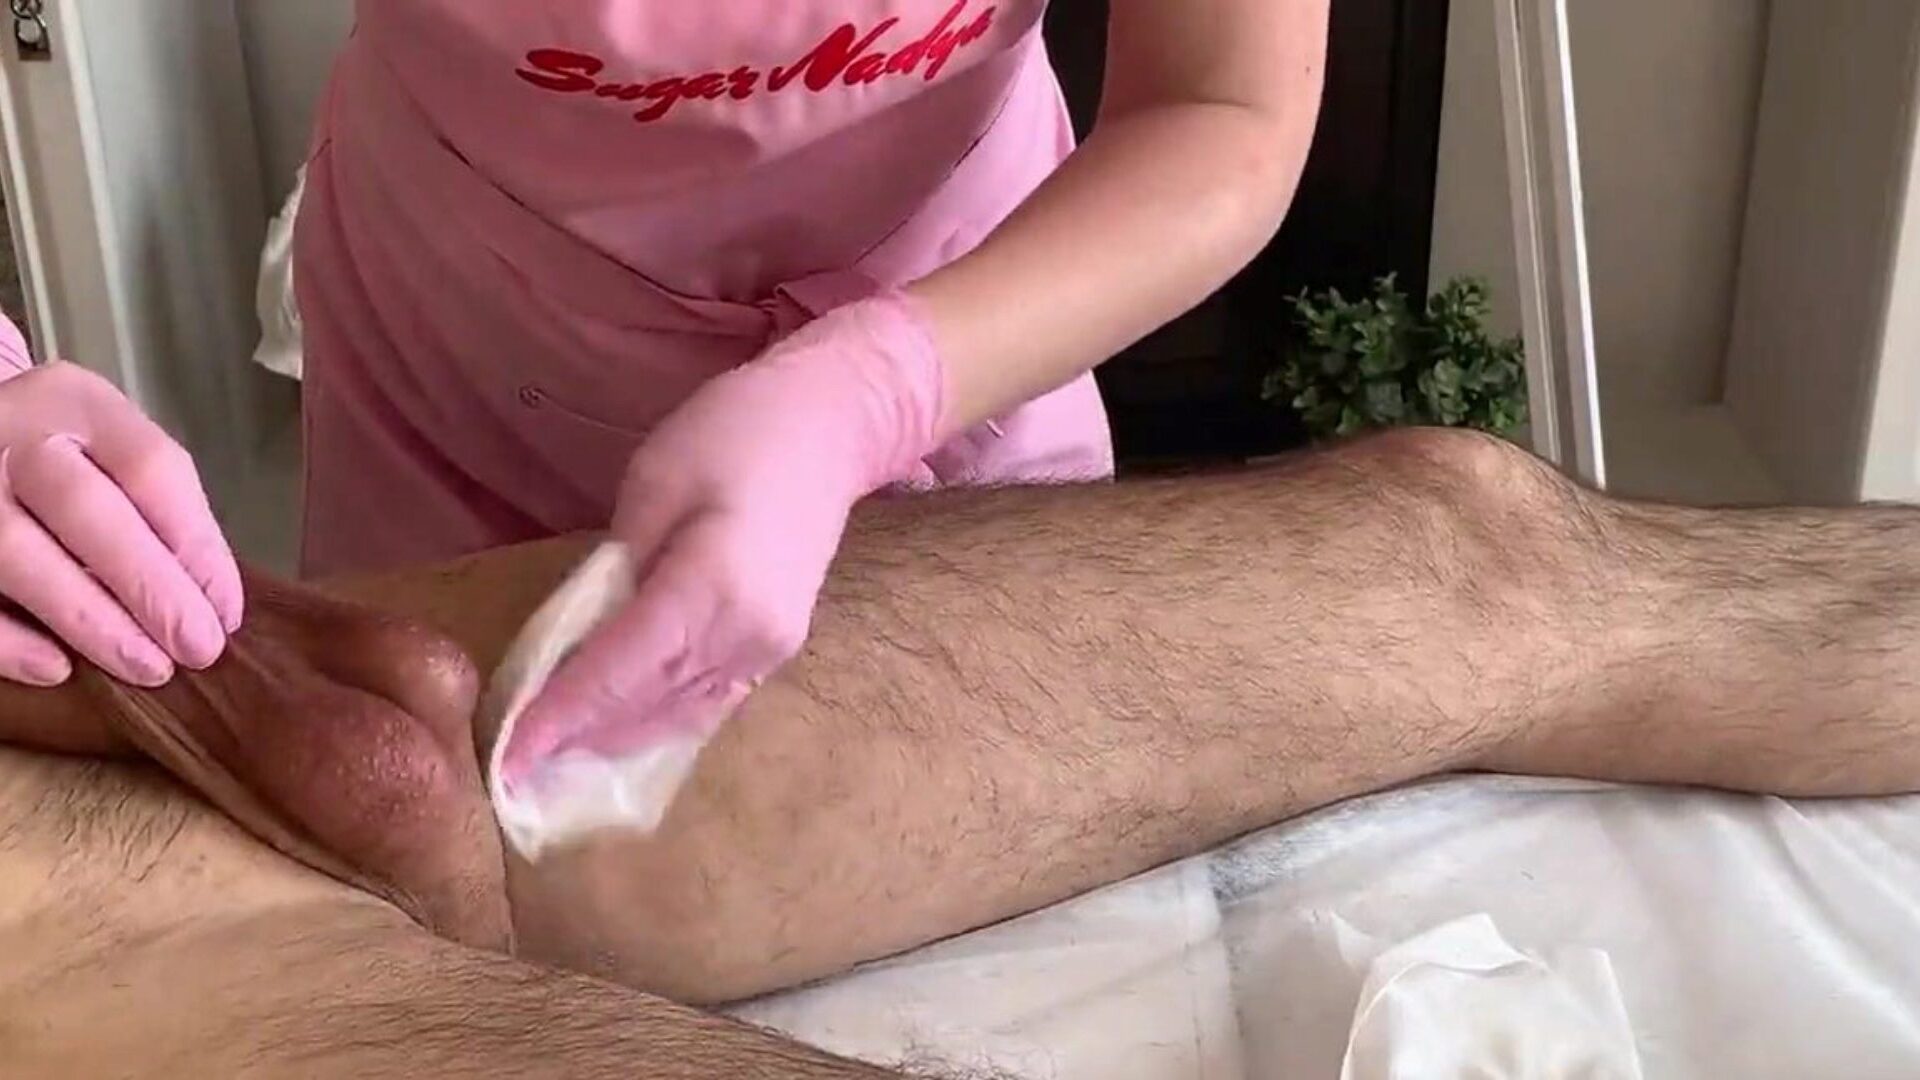 A plenty of of sex cream - ejaculation during waxing SugarNadya did not await to watch so much sperm from the client during spunk fountain